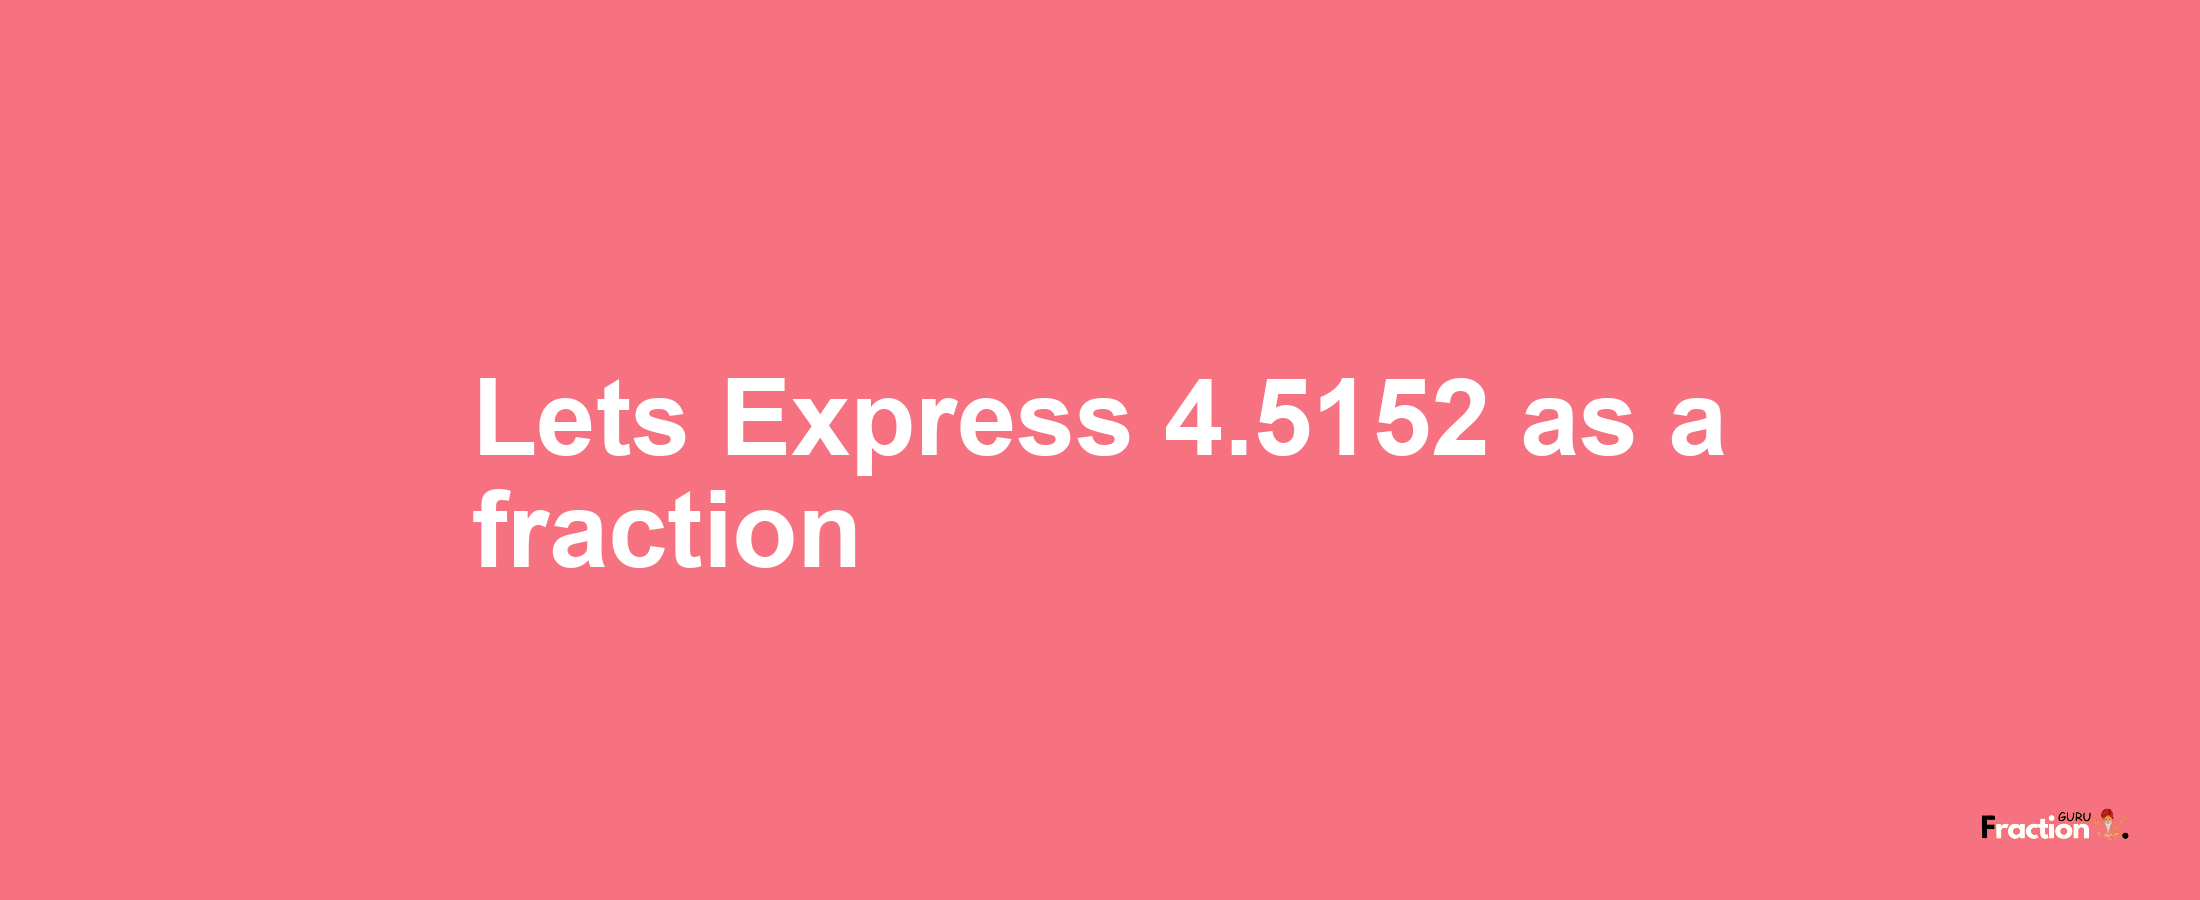 Lets Express 4.5152 as afraction